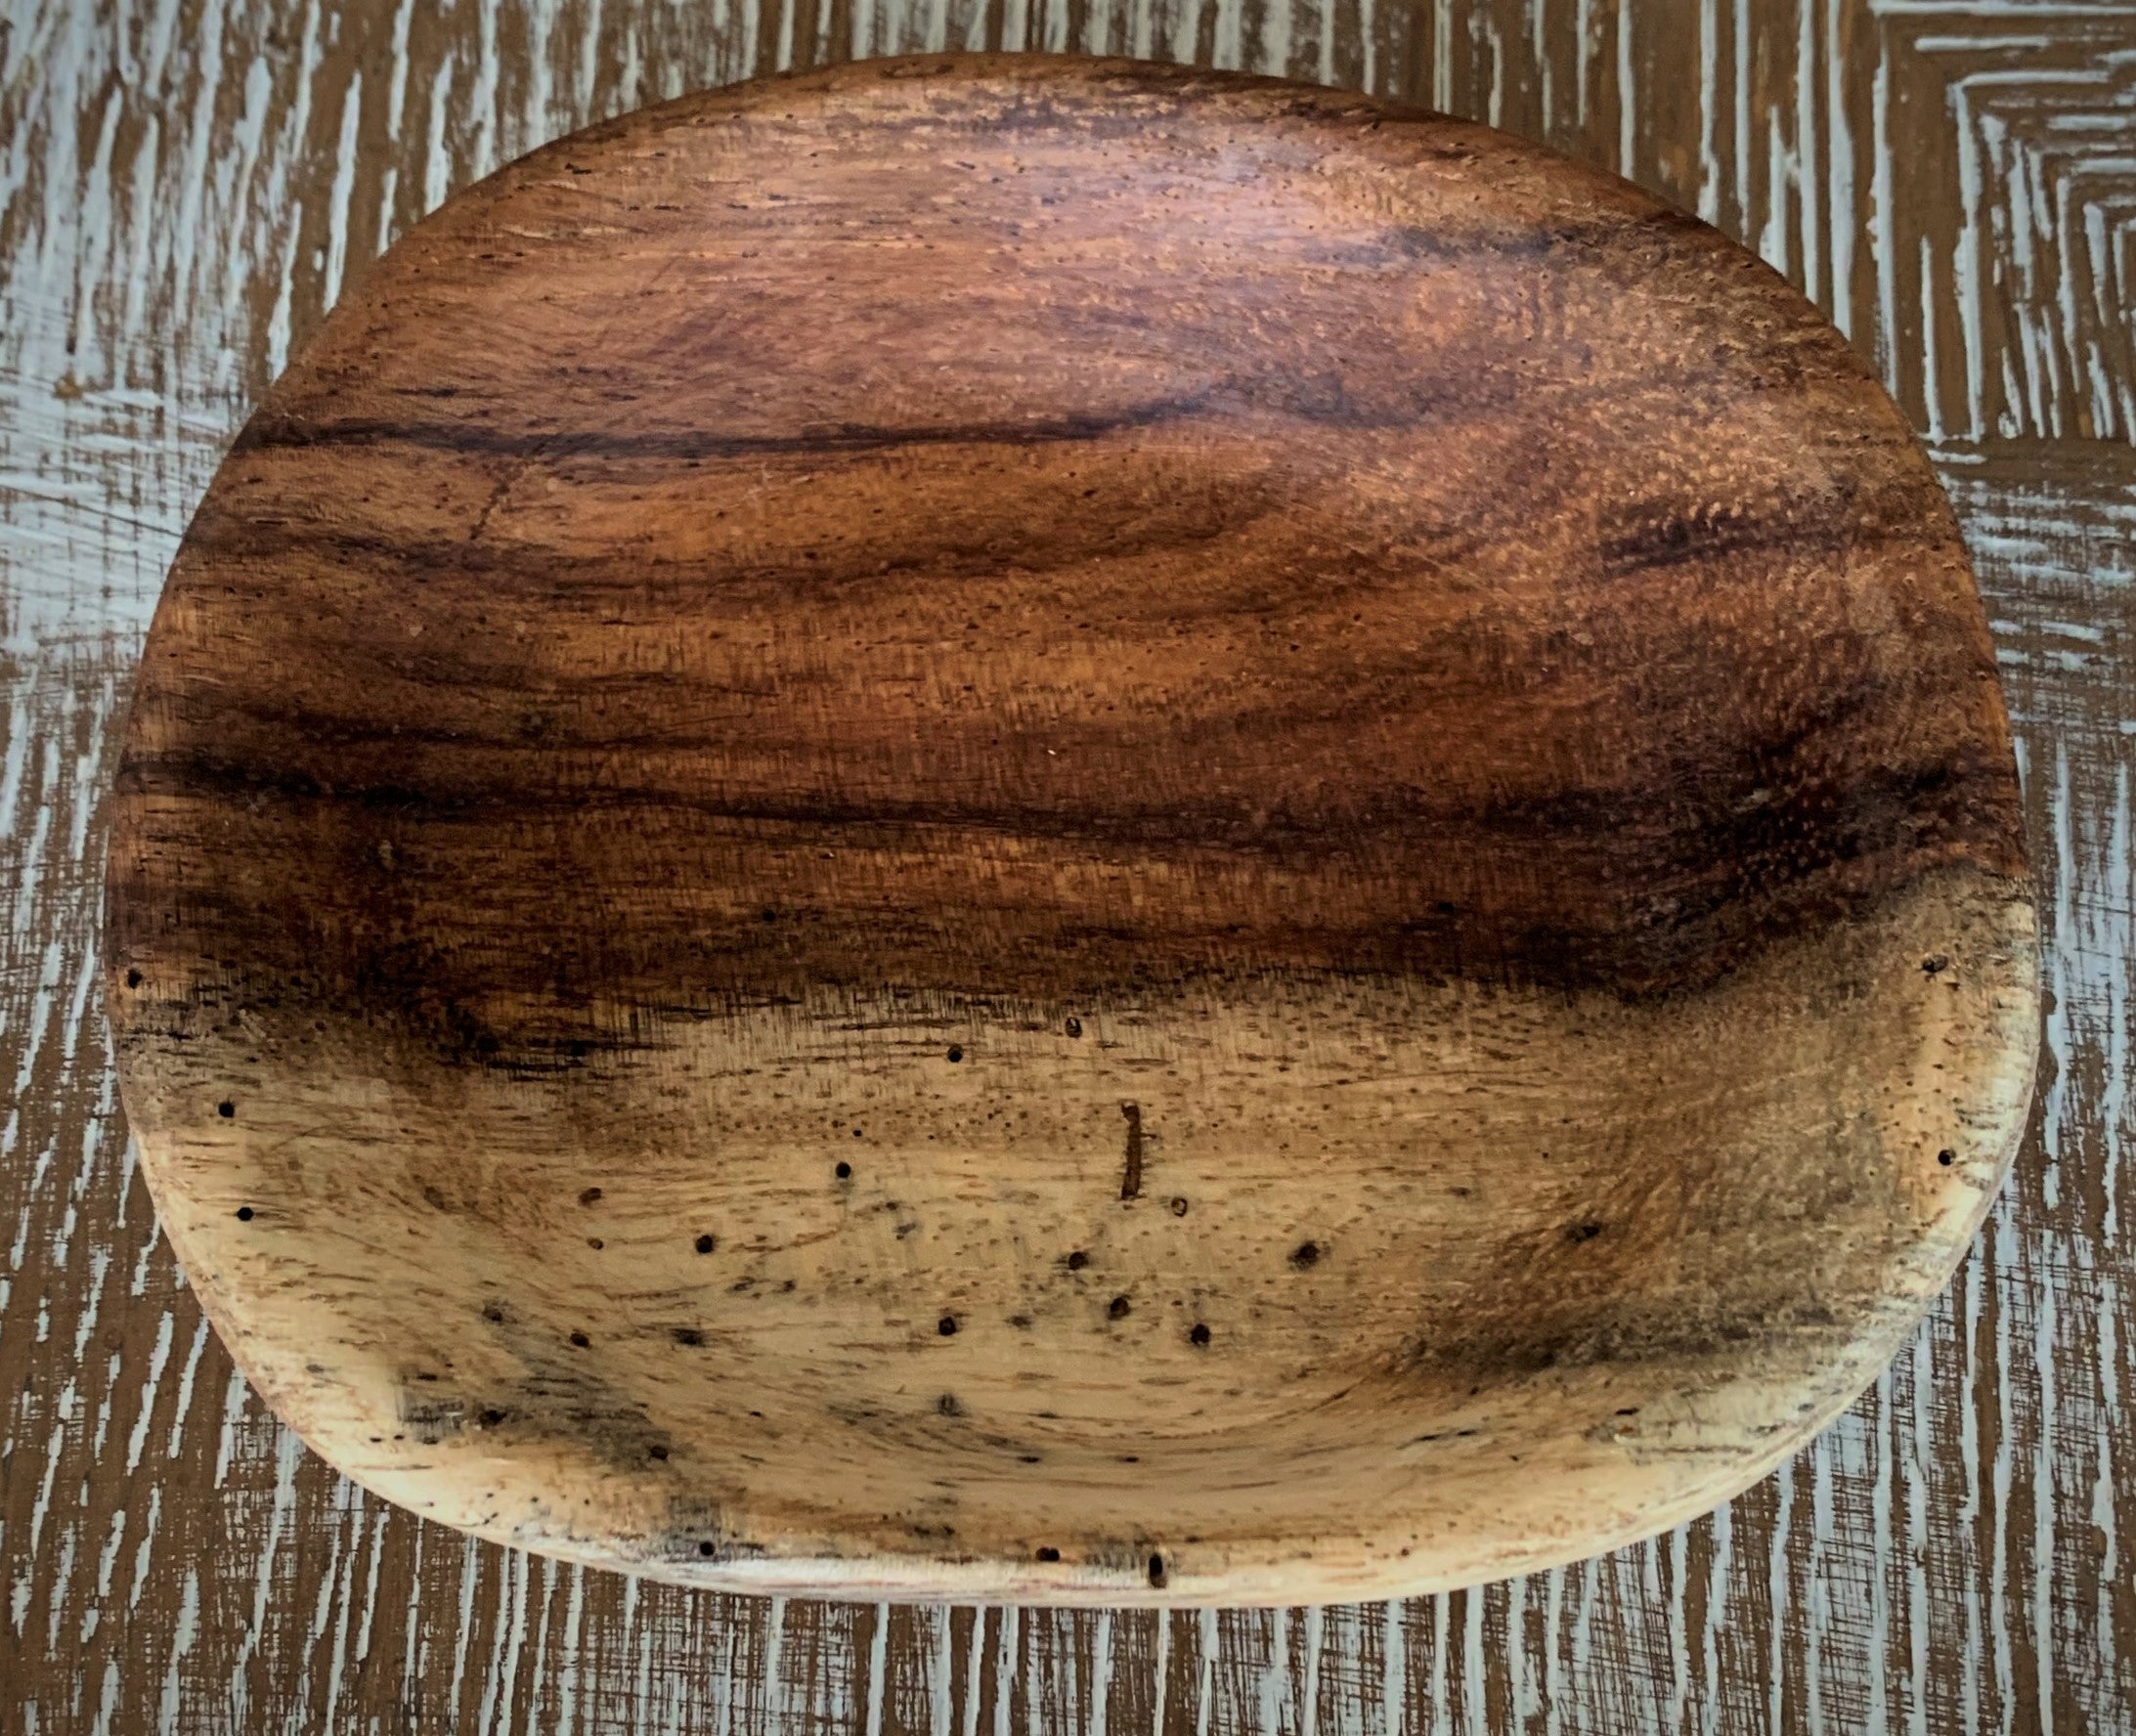 Harcarved plate make from guanacaste wood